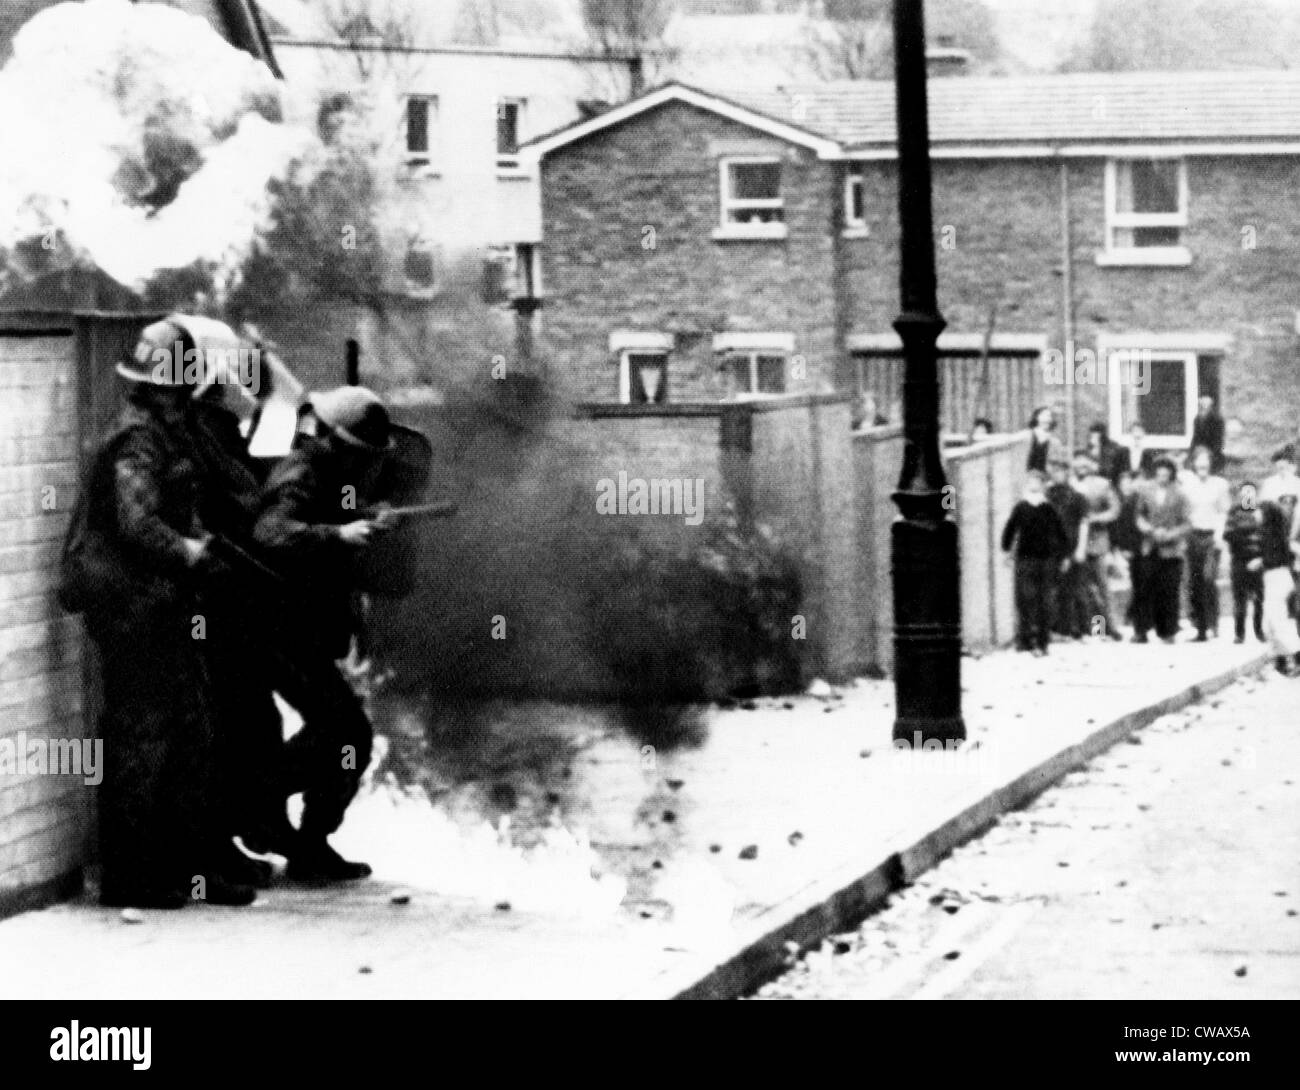 British troops stopped by a gasoline bomb thrown by rioters in Londonderry, Northern Ireland, 1971. Courtesy: CSU Archives / Stock Photo